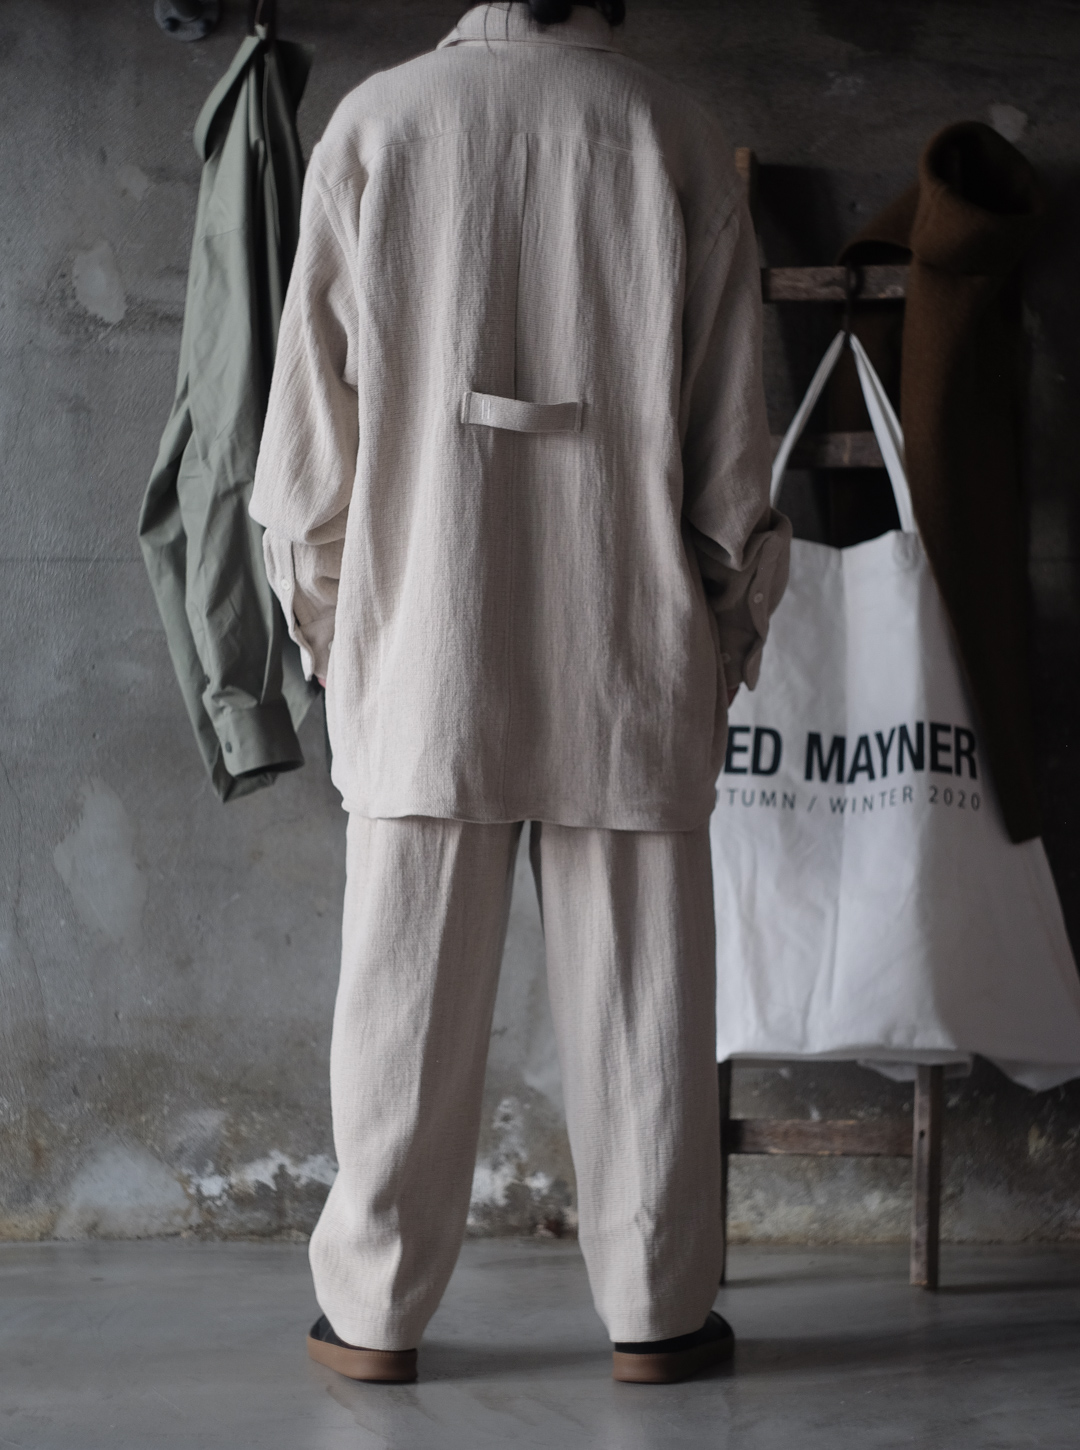 STYLING “HED MAYNER AW20” | MAIDENS SHOP | メイデンズショップ